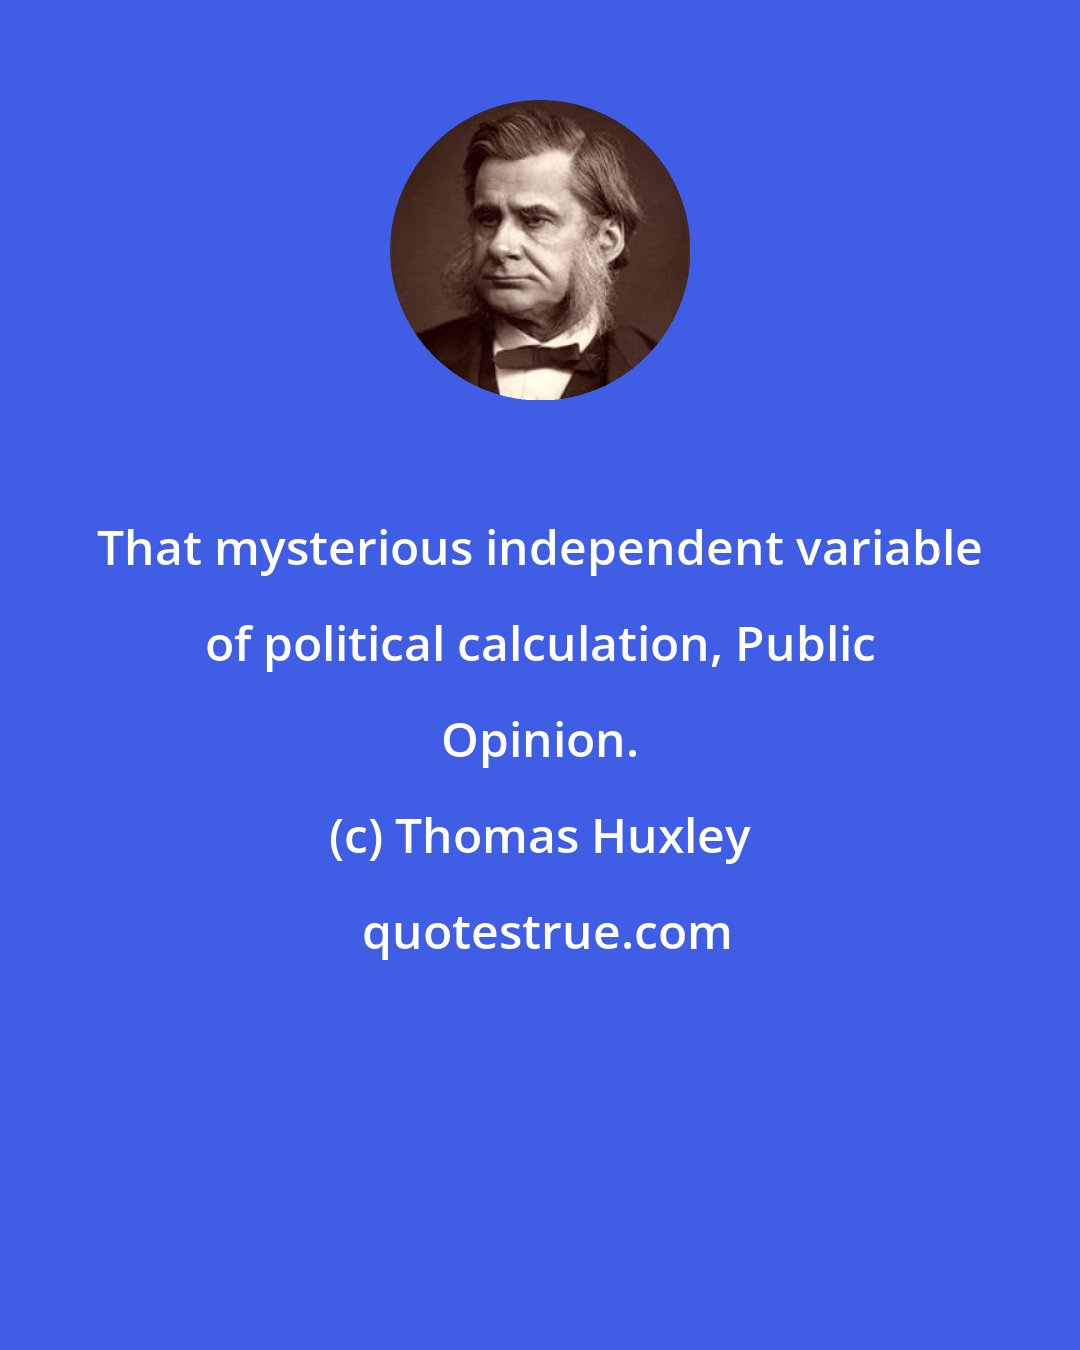 Thomas Huxley: That mysterious independent variable of political calculation, Public Opinion.